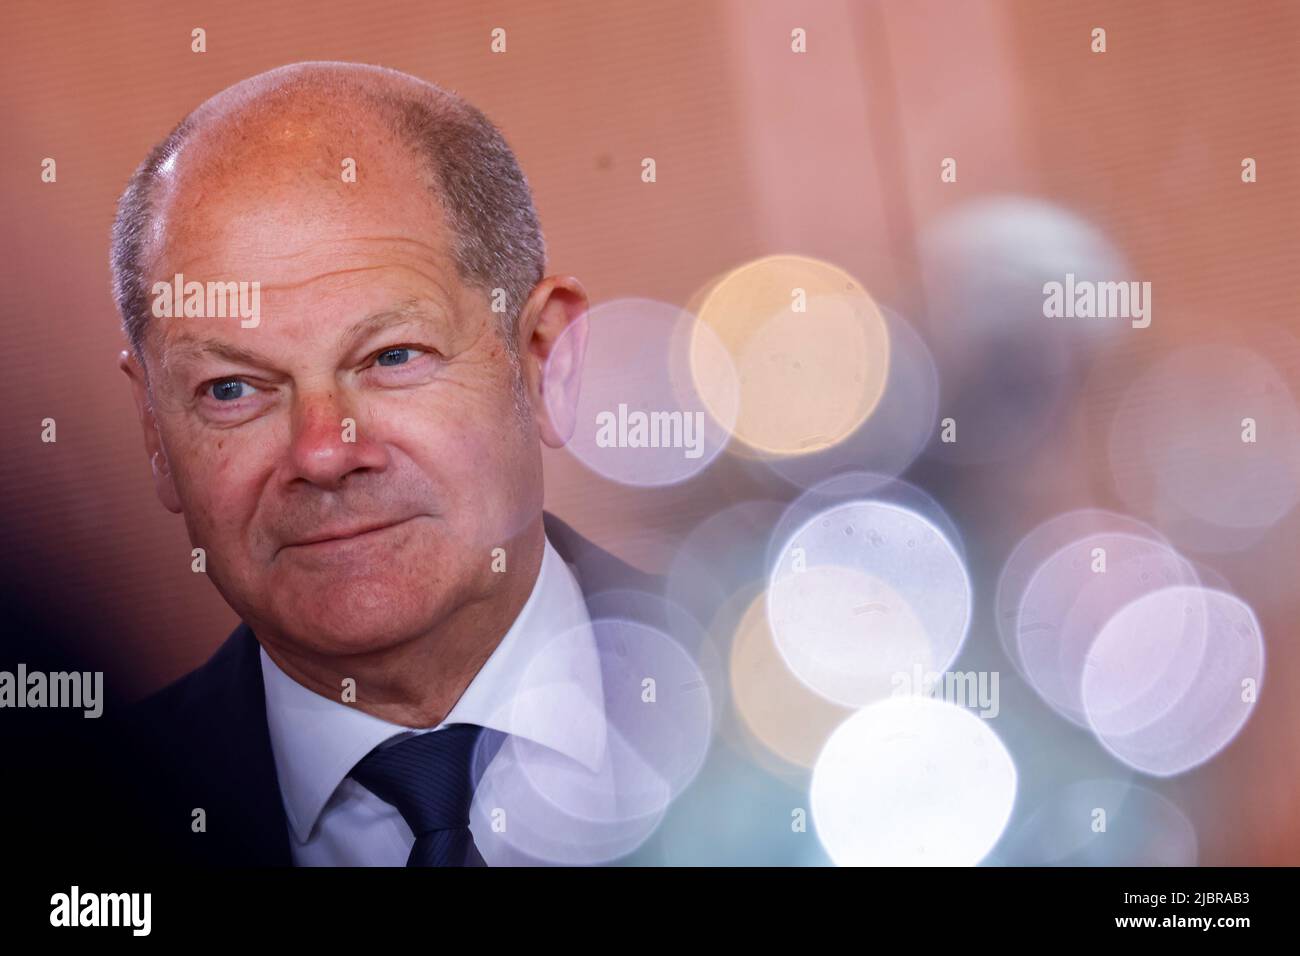 German Chancellor Olaf Scholz presides over the weekly cabinet meeting at the Federal Chancellery in Berlin, Germany, June 8, 2022. REUTERS/Hannibal Hanschke Stock Photo